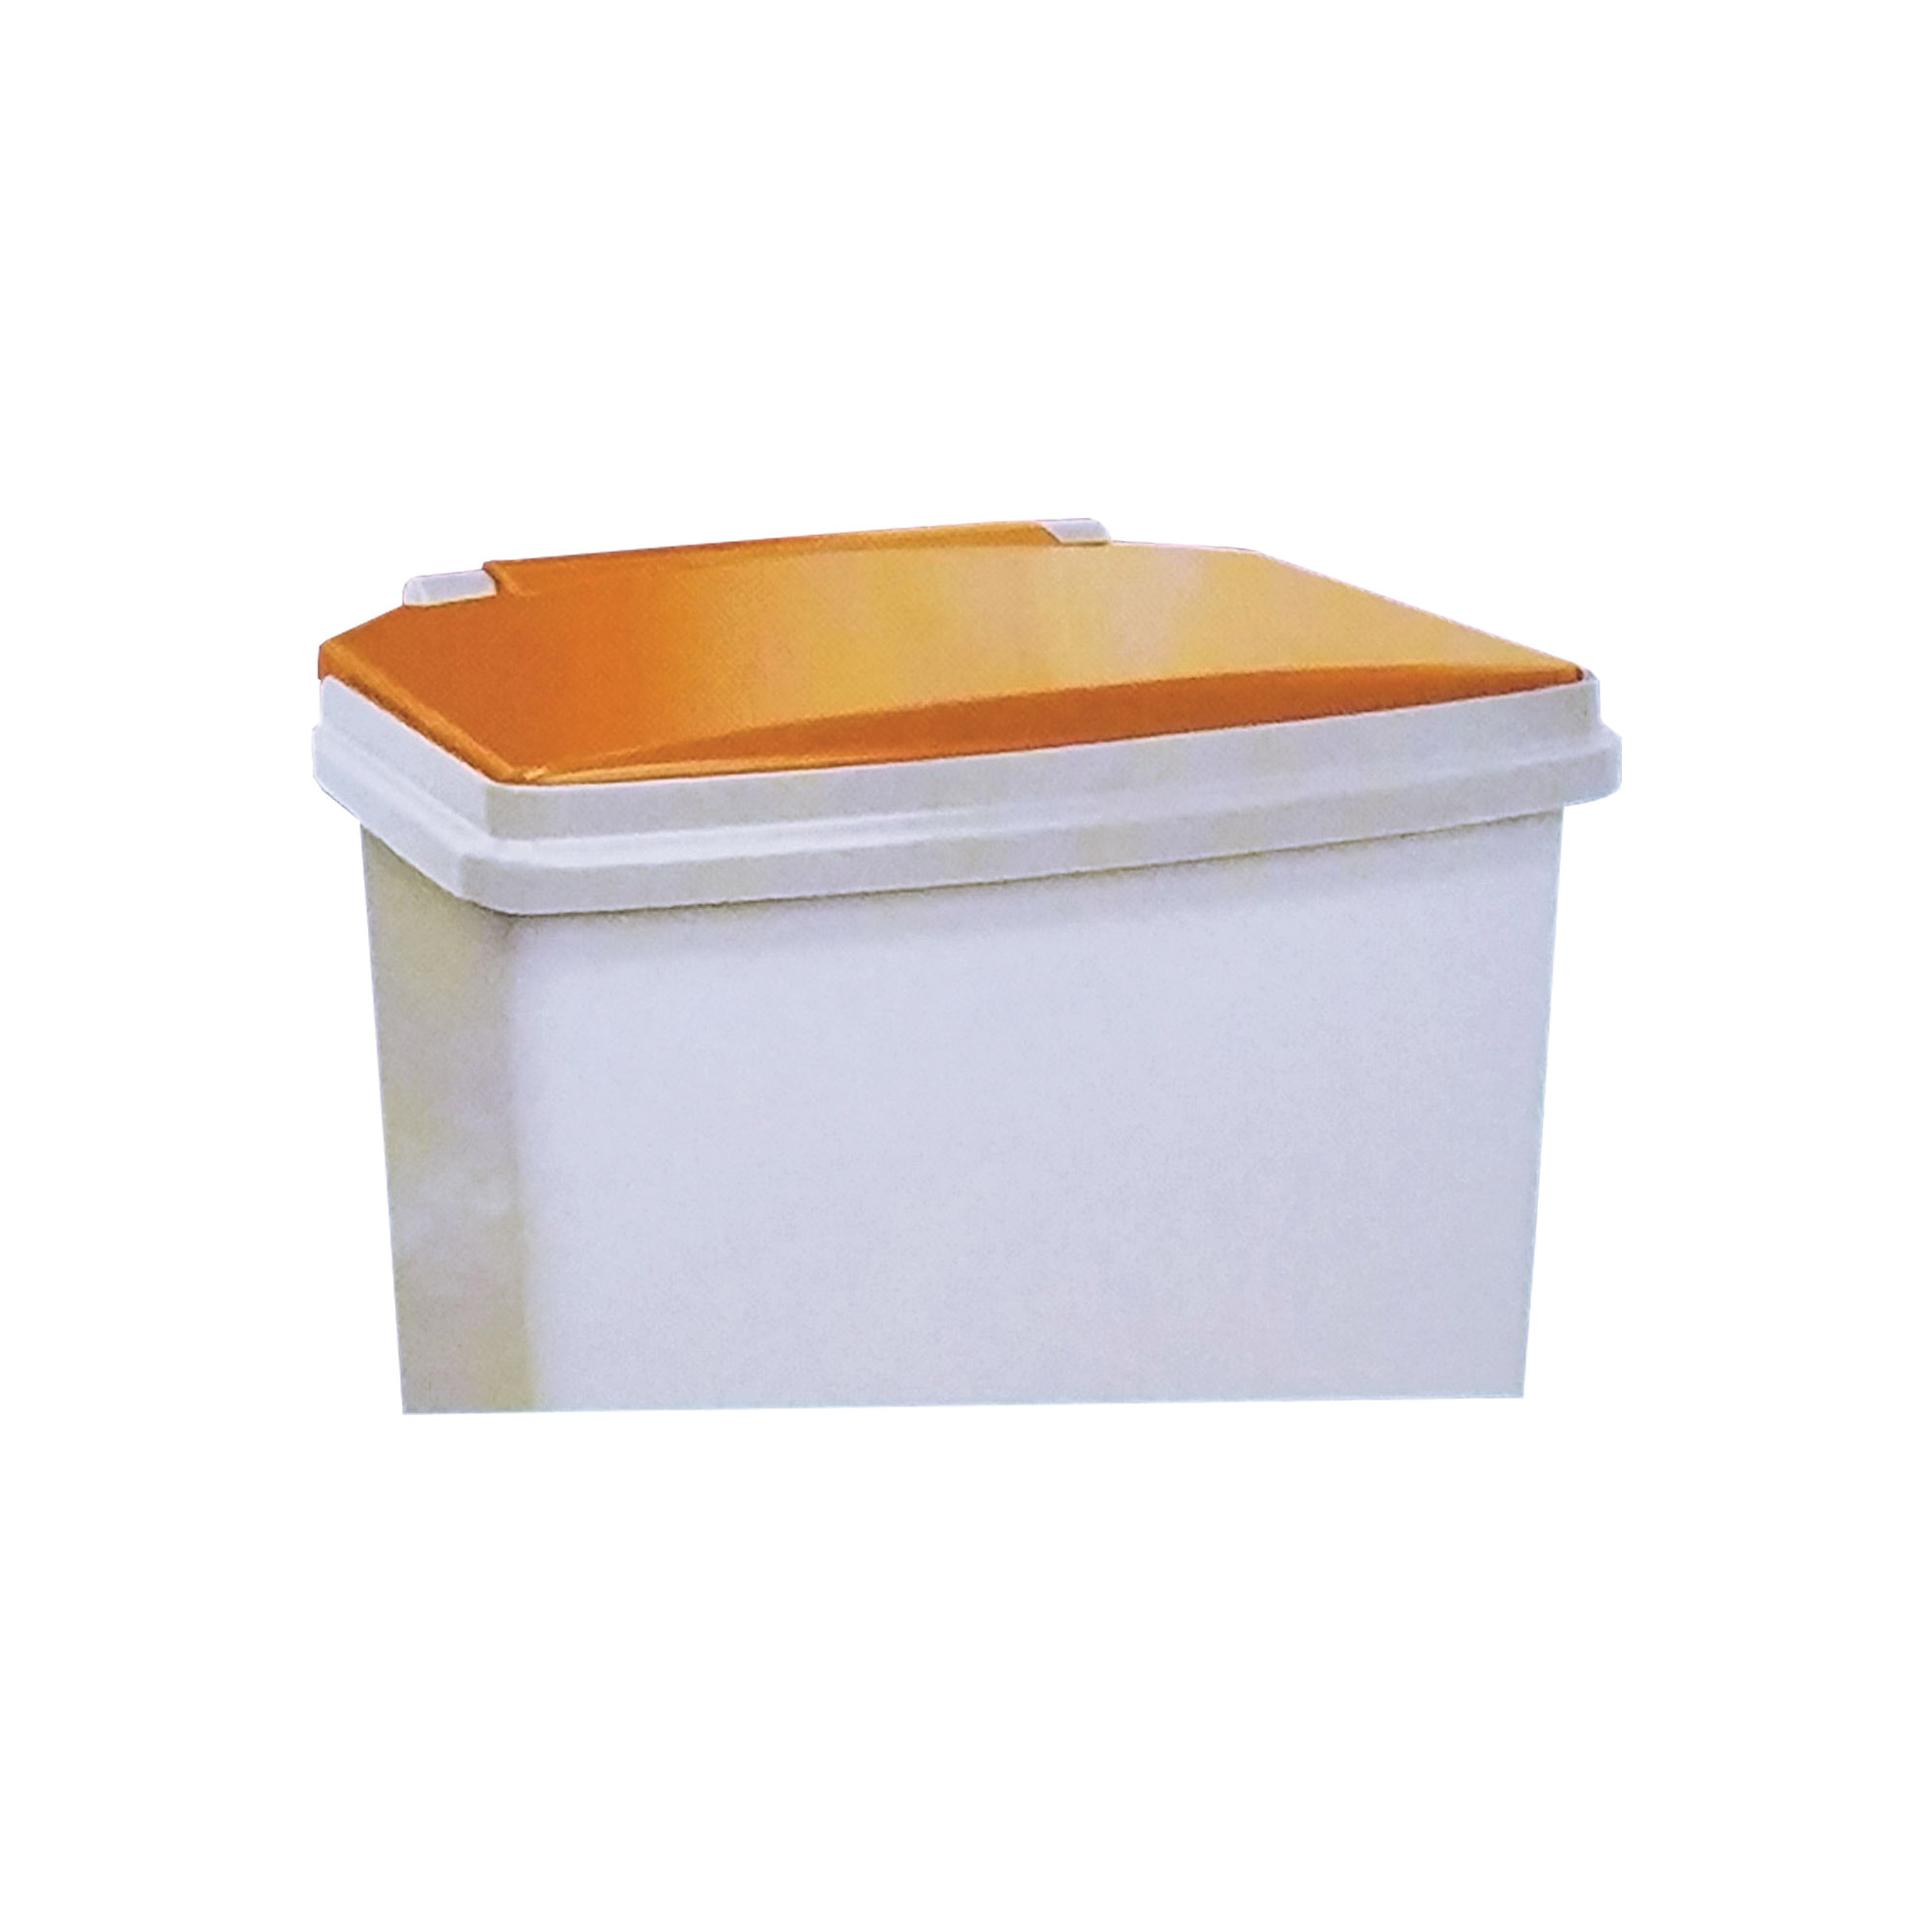 Orange Replacement Lid For EB-3296 & EB-3297